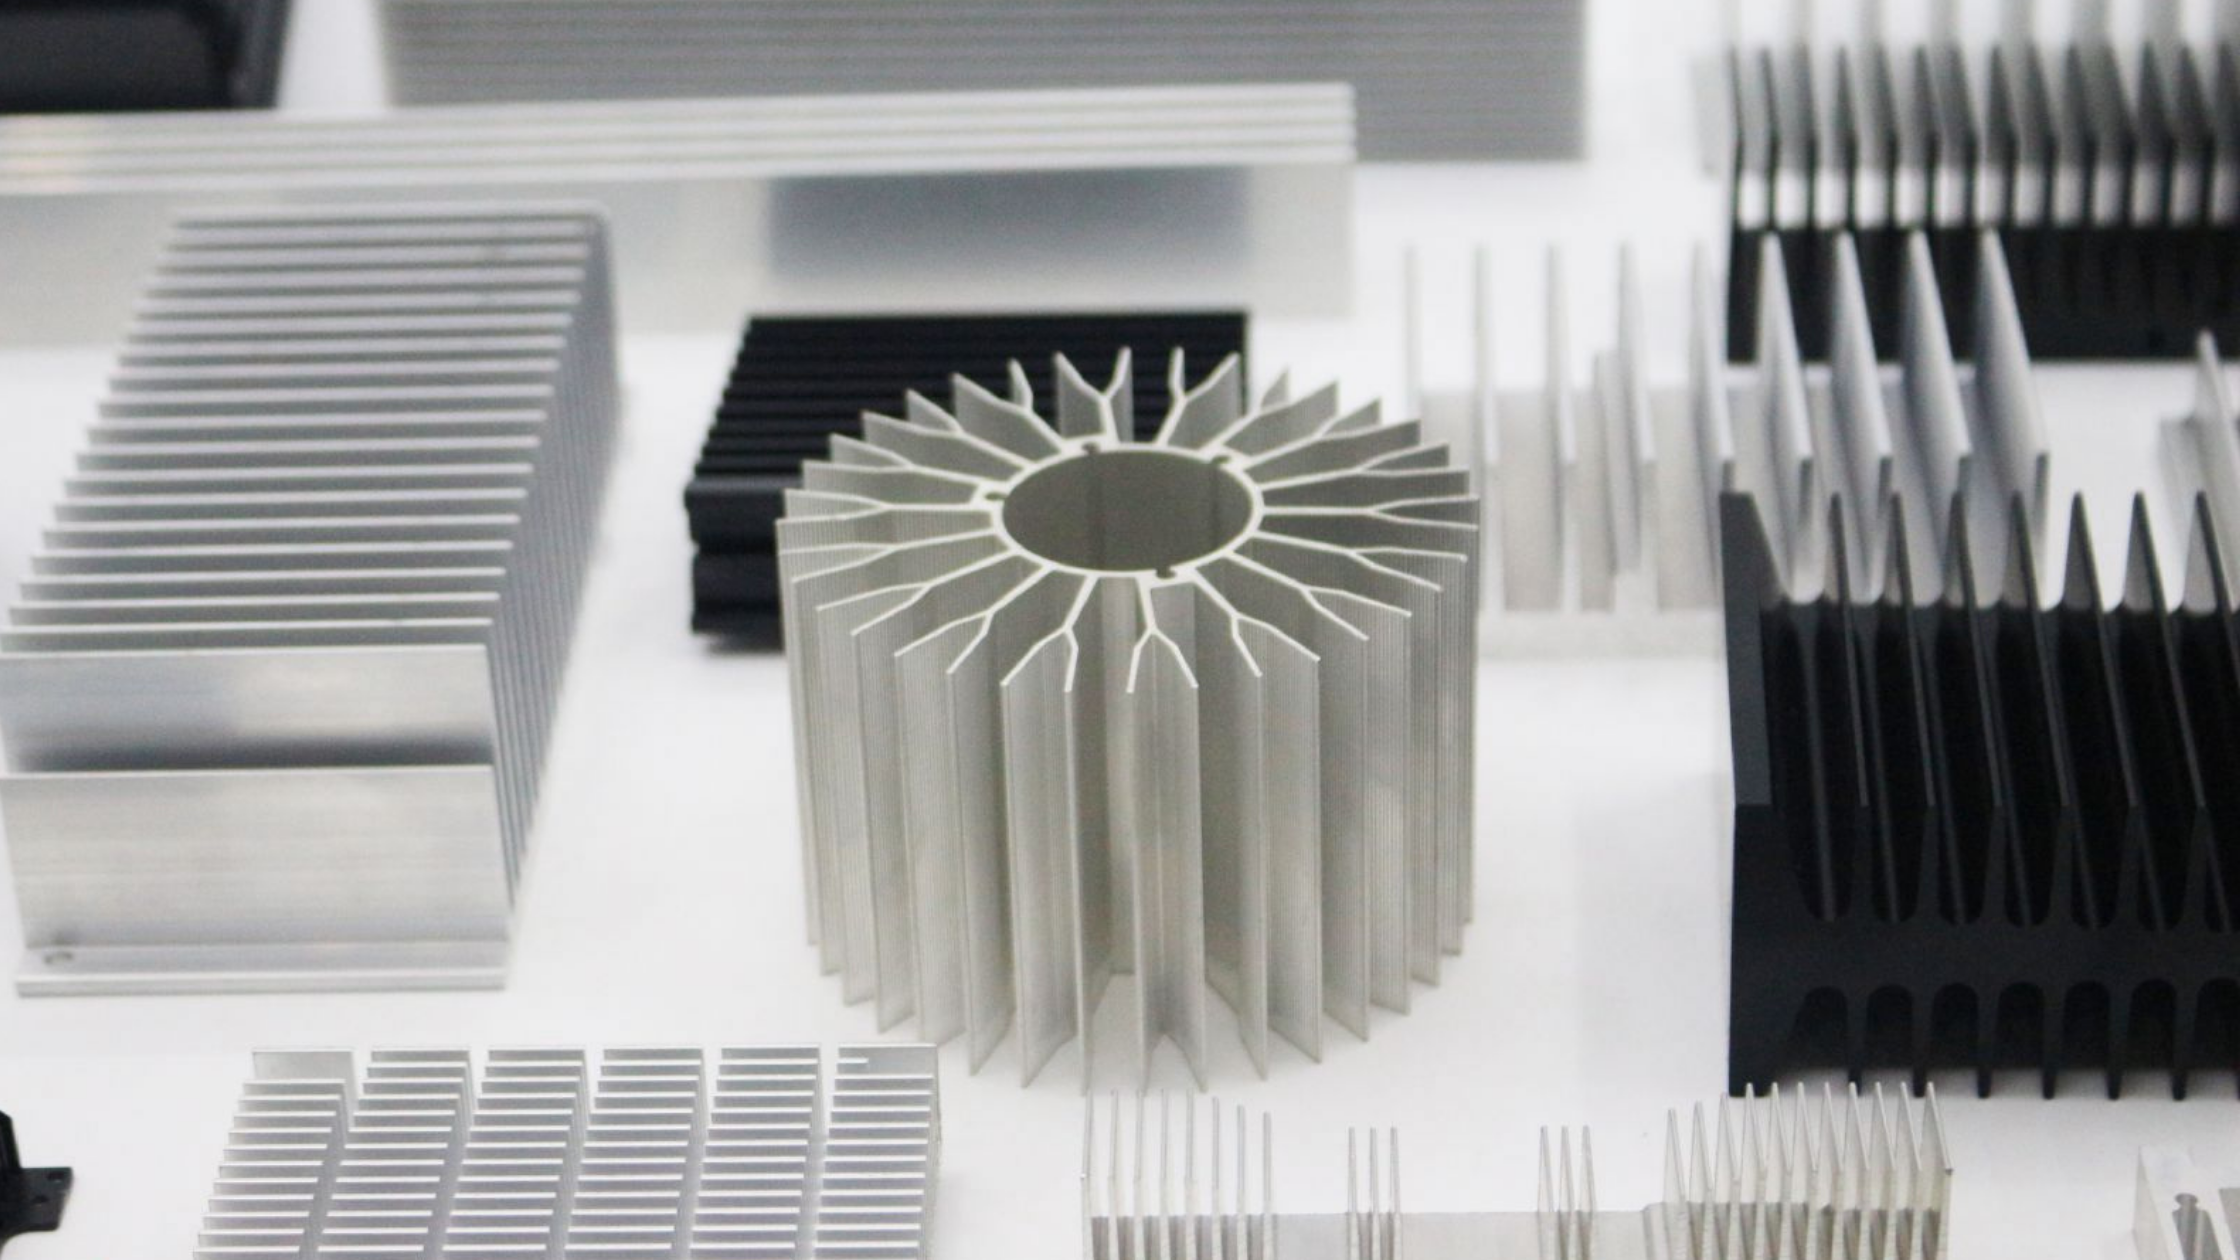 Do you know what a heat sink is and what it is used for？